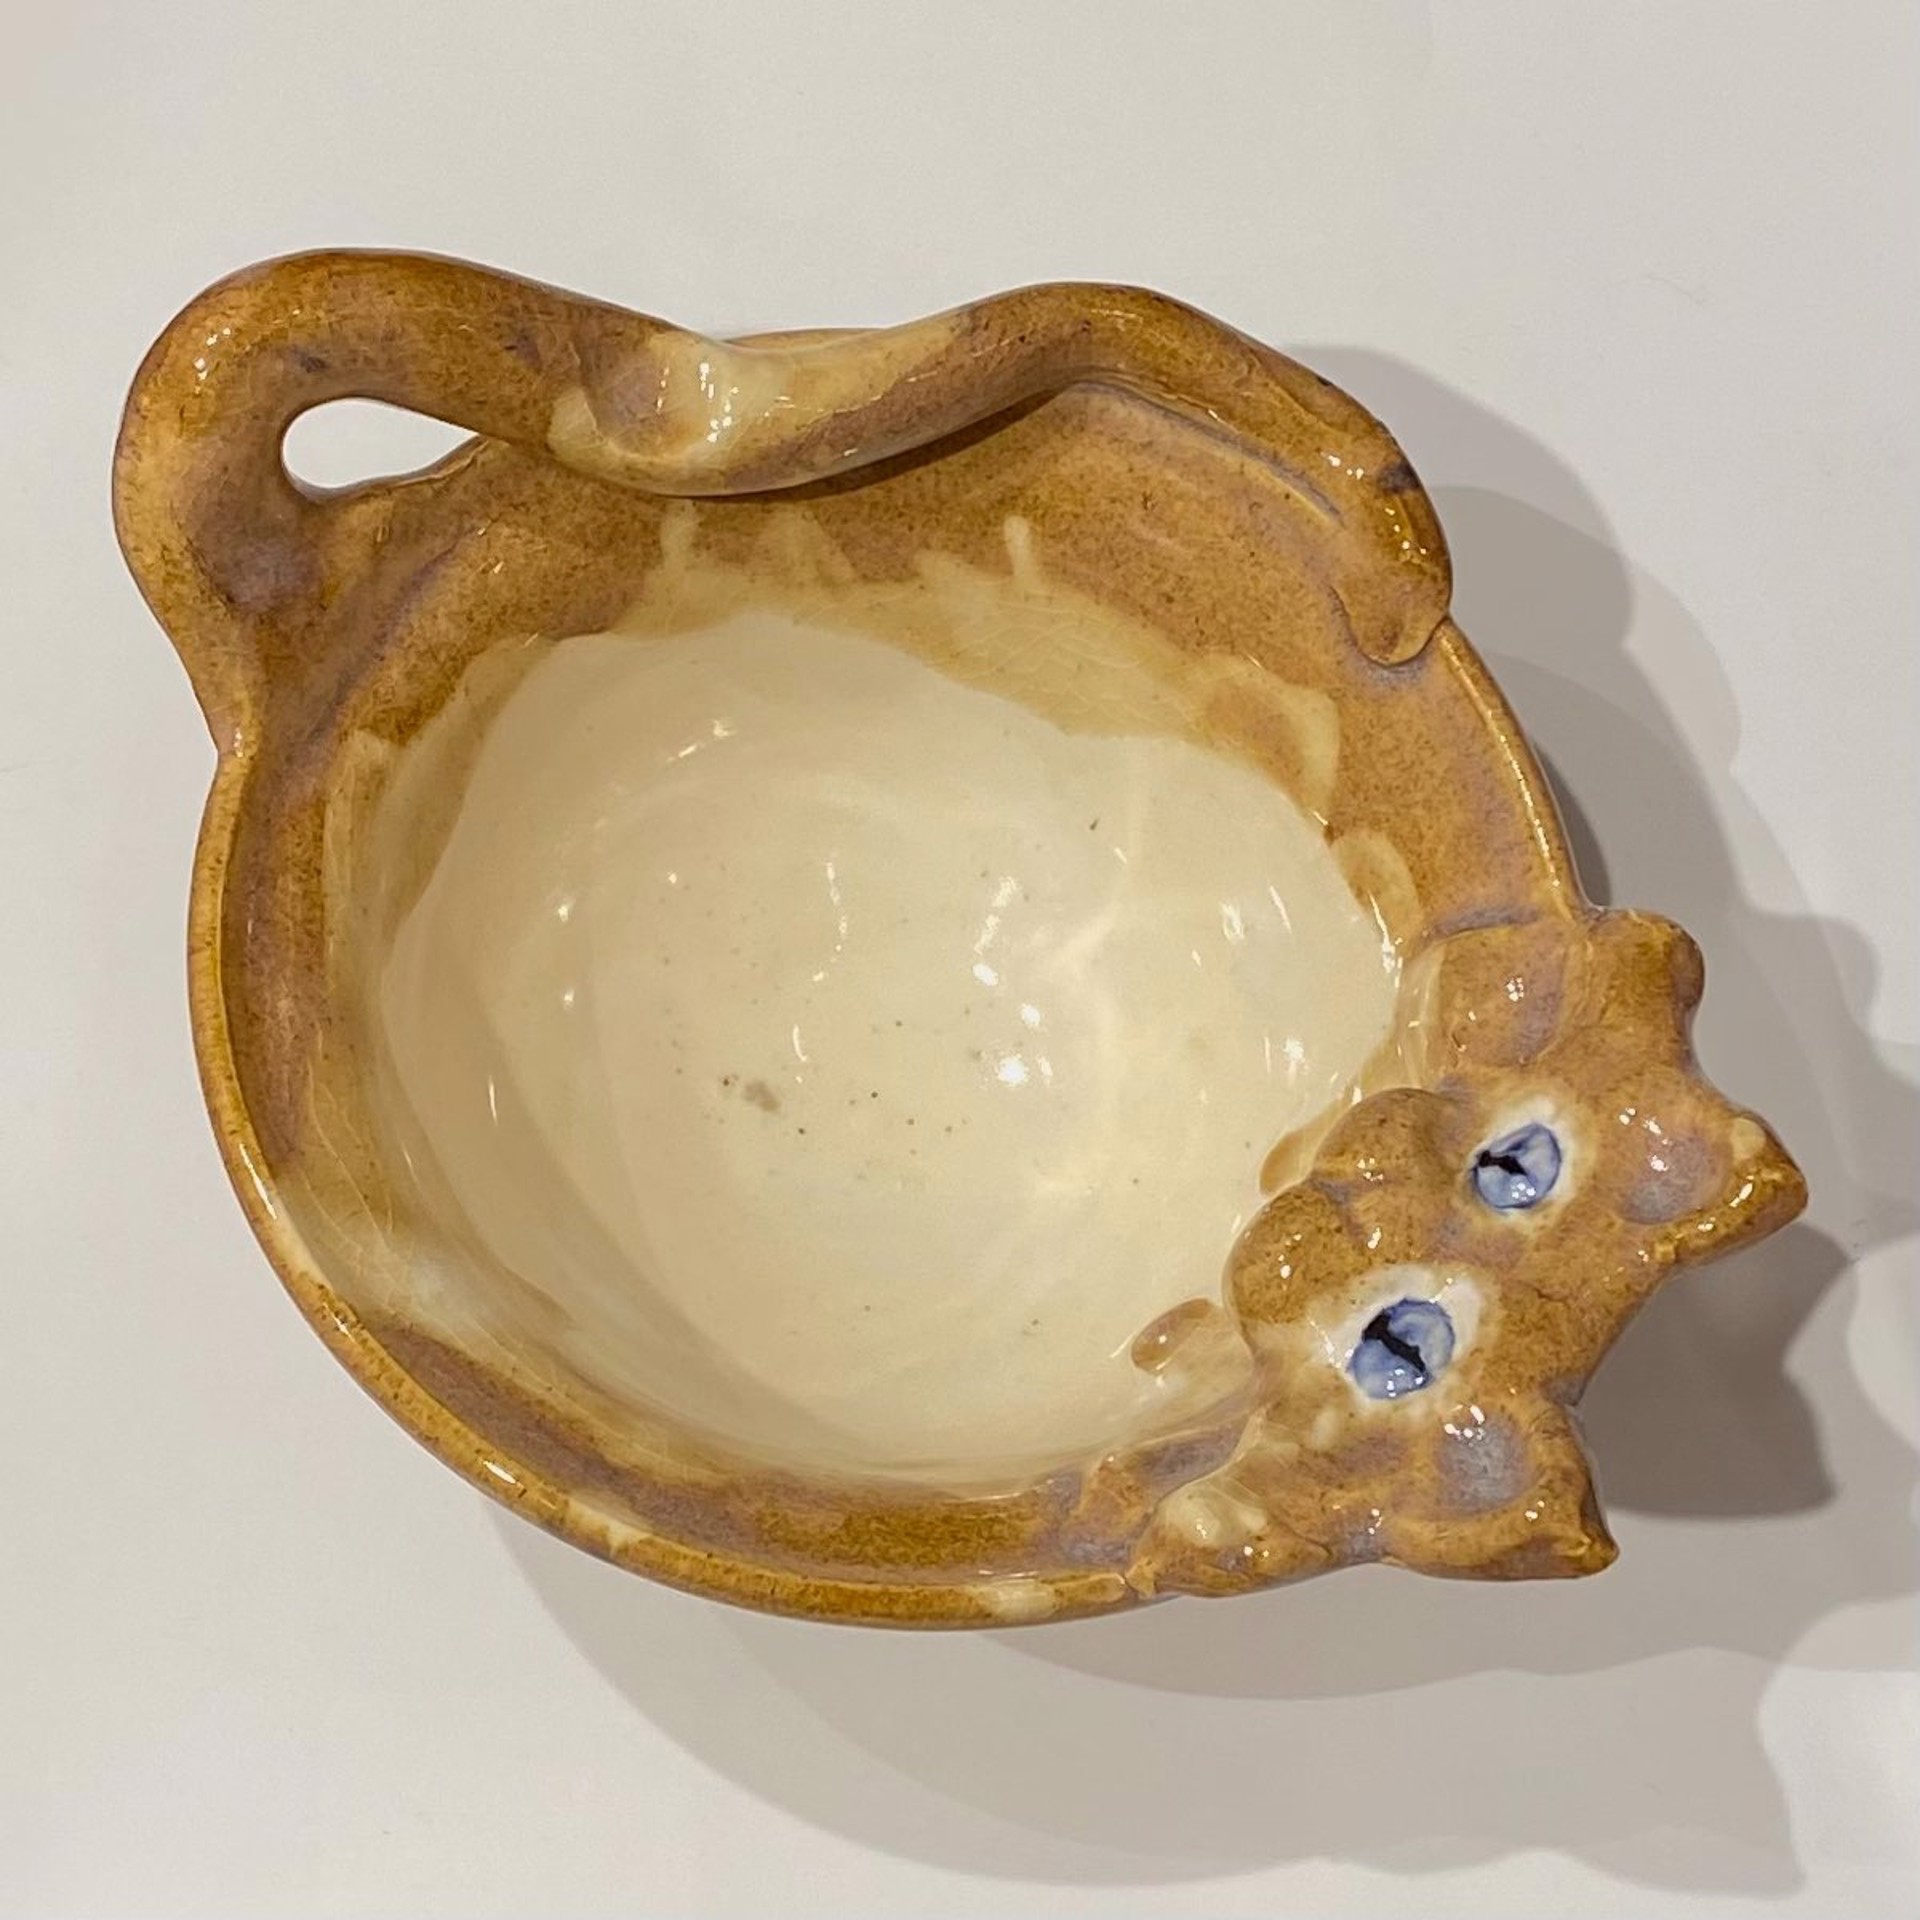 KK22-52  Light Brown and Cream Cat Bowl by Kate Krause